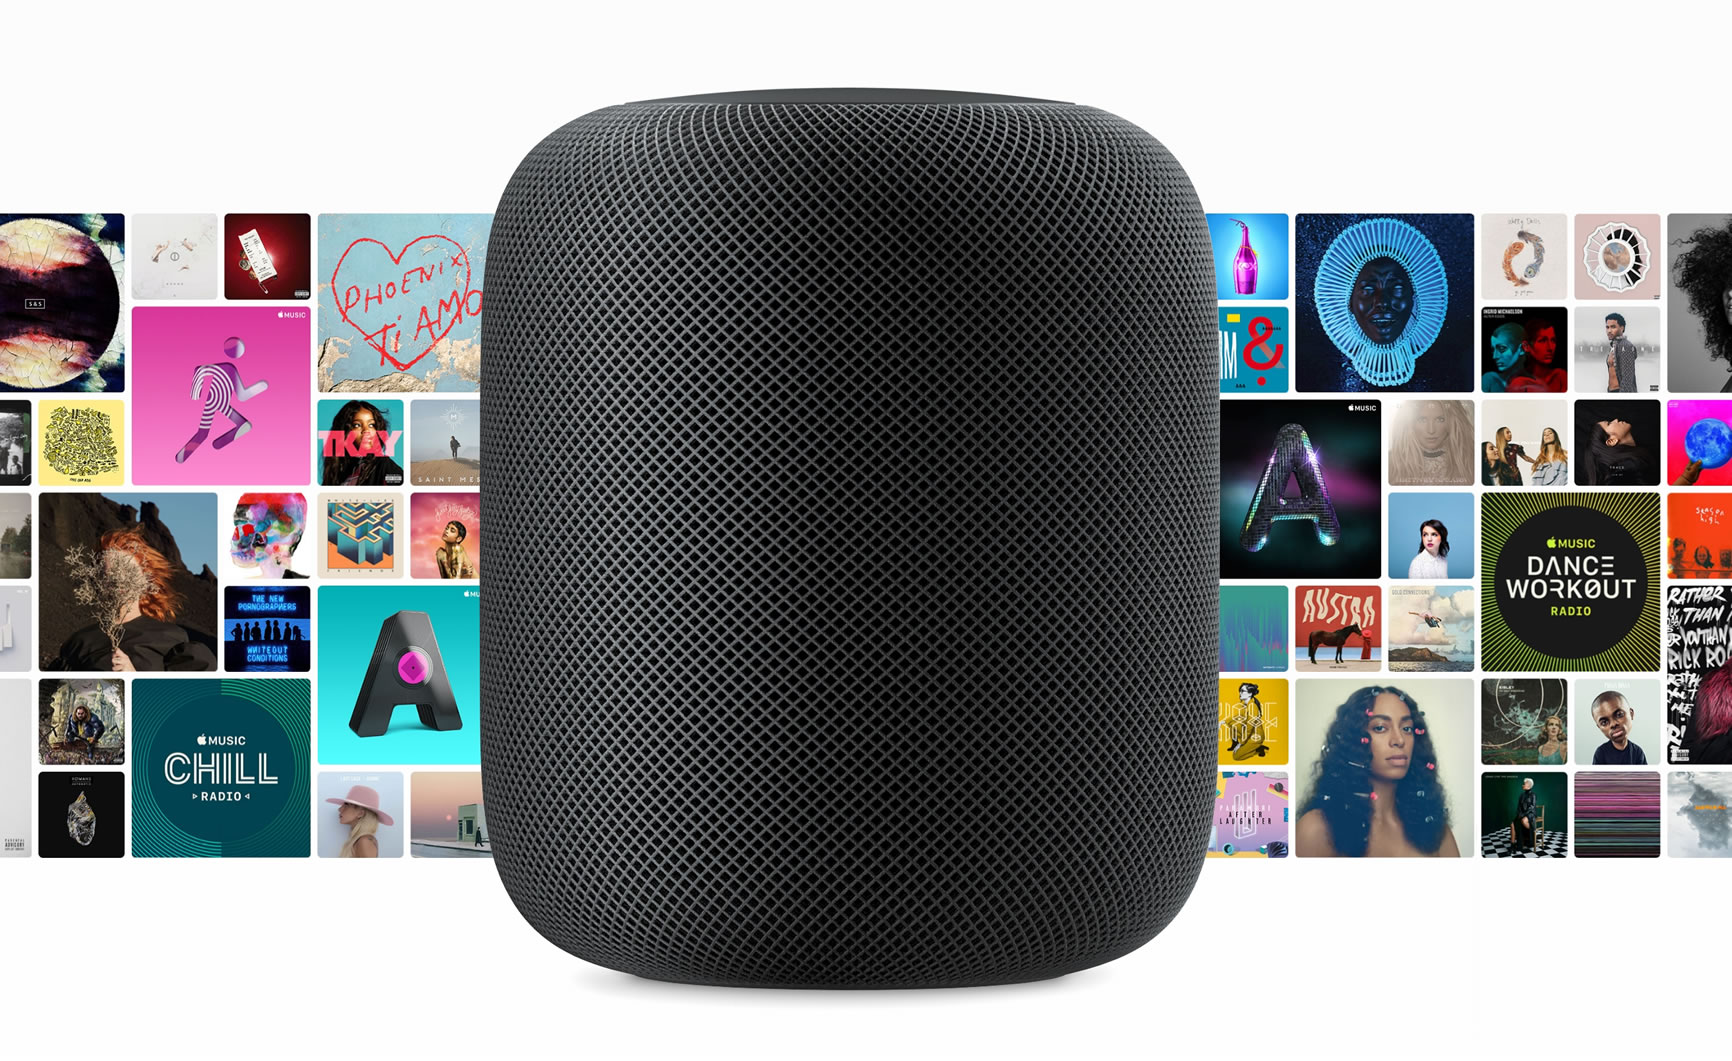 Apple introduces HomePod, its entry into the home assistant market